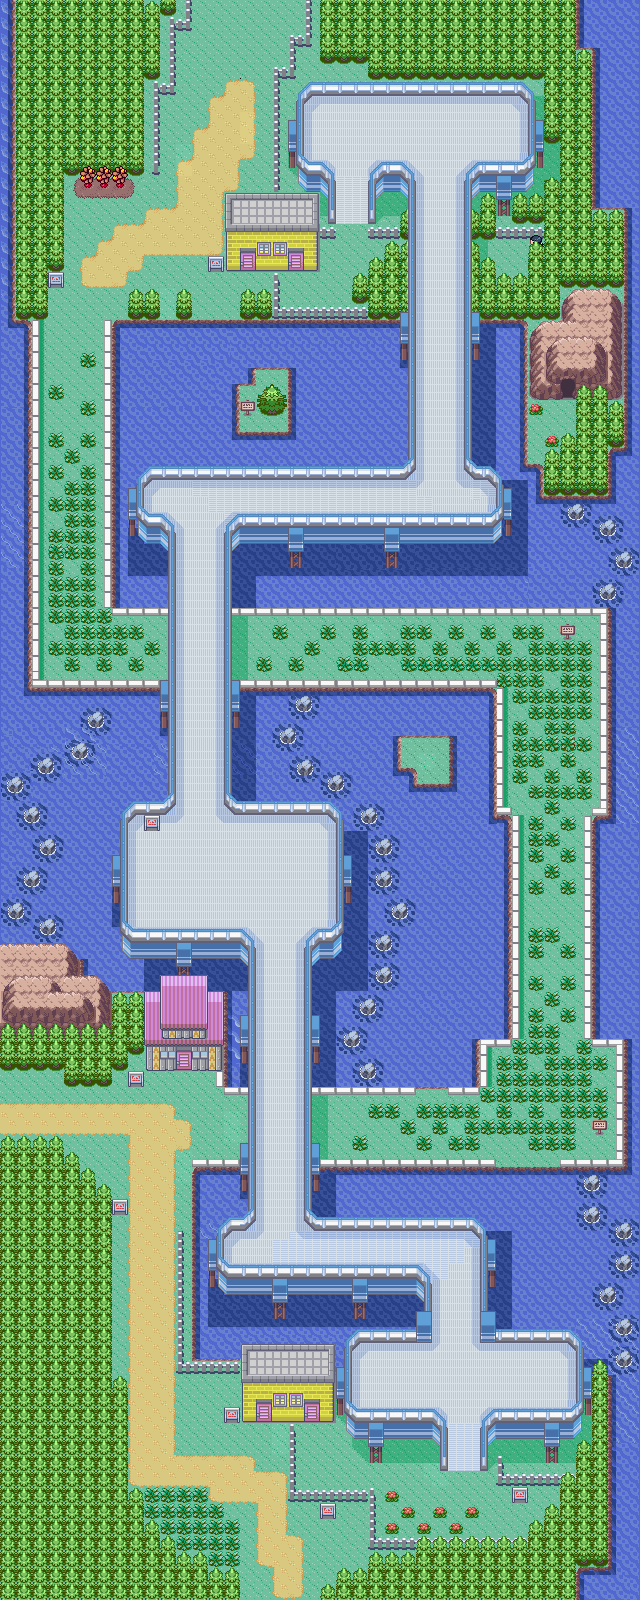 Pokémon Emerald — StrategyWiki  Strategy guide and game reference